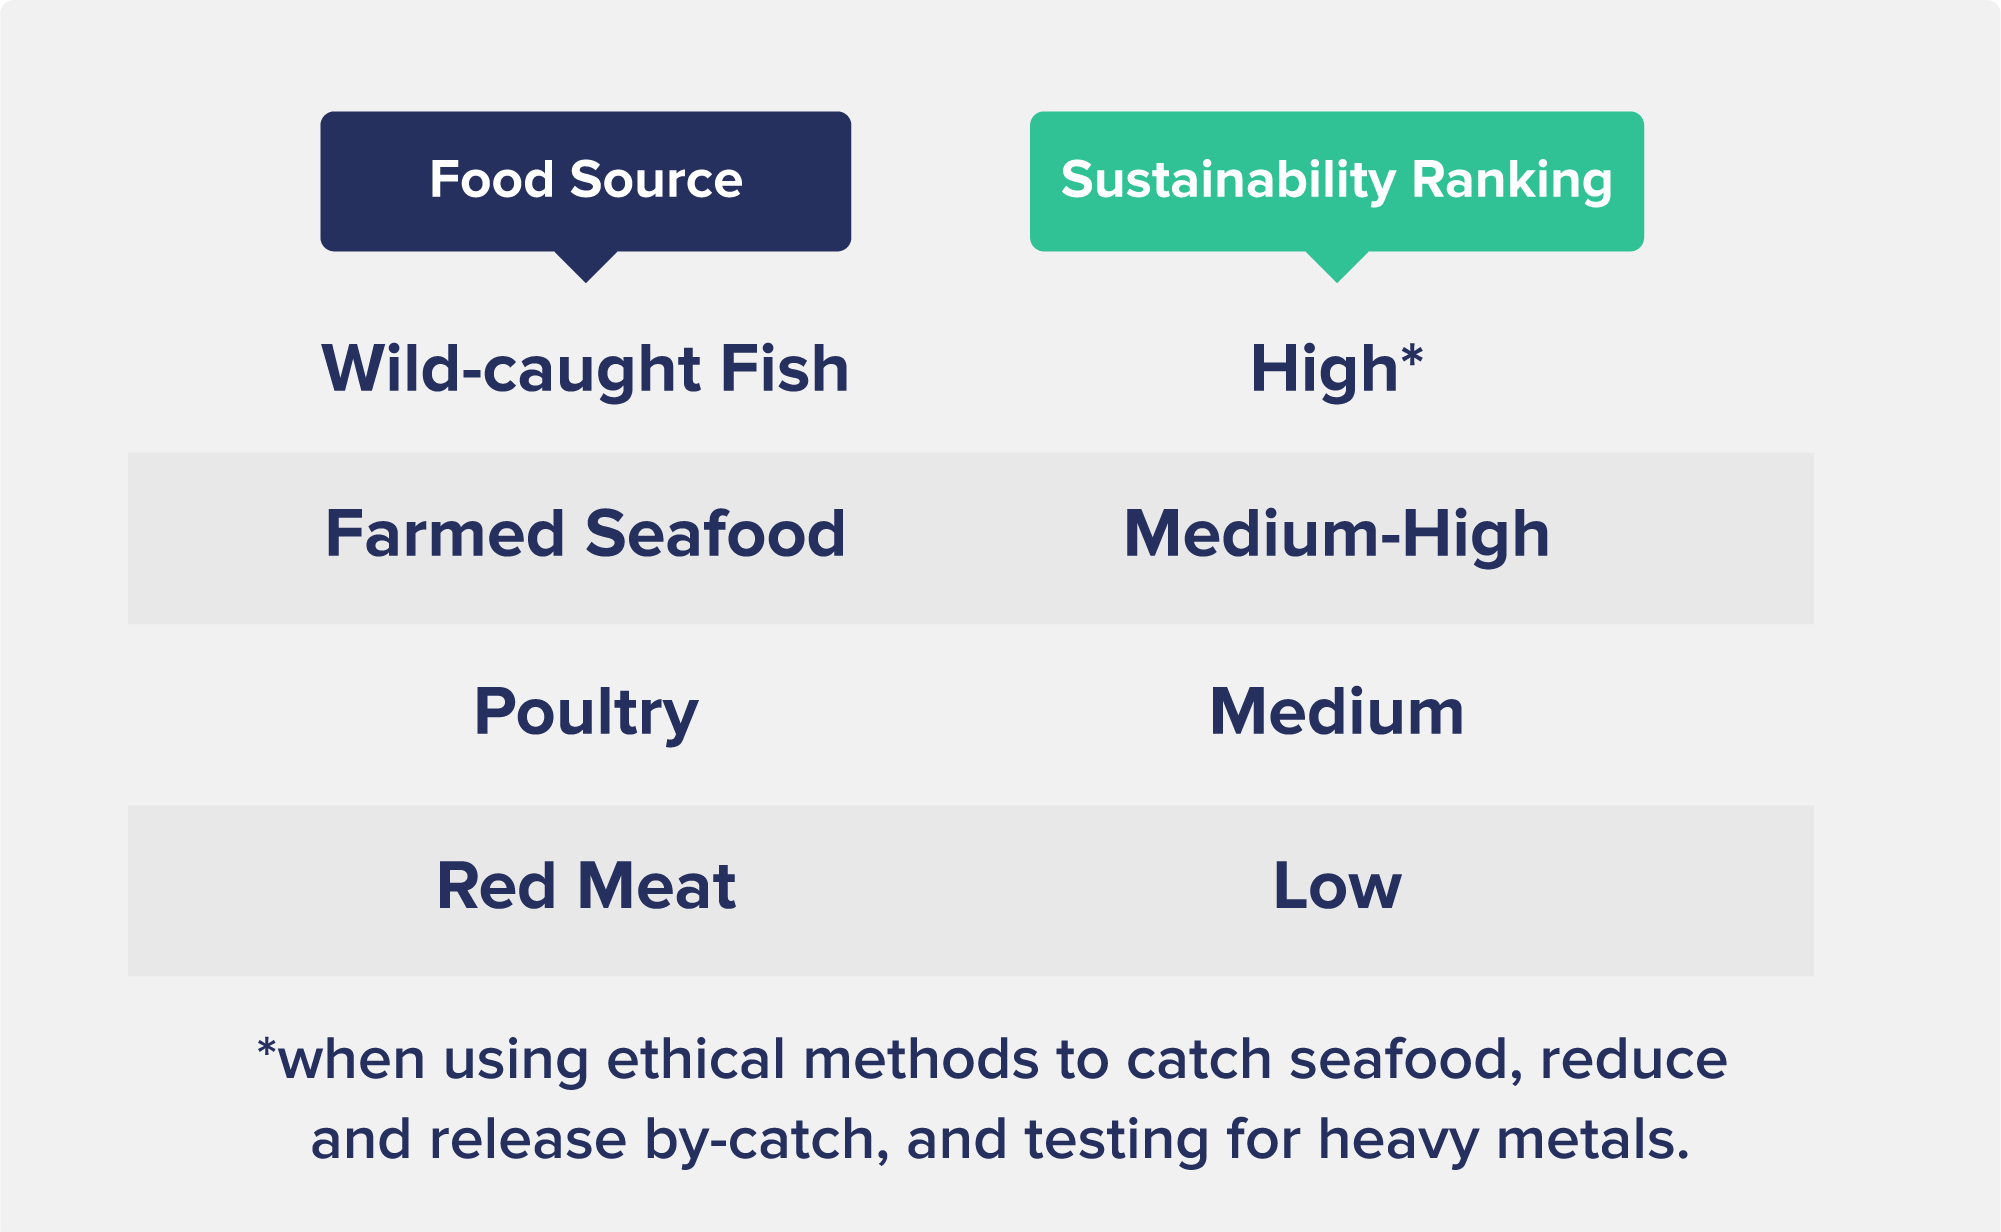 Food Source and Sustainability Ranking